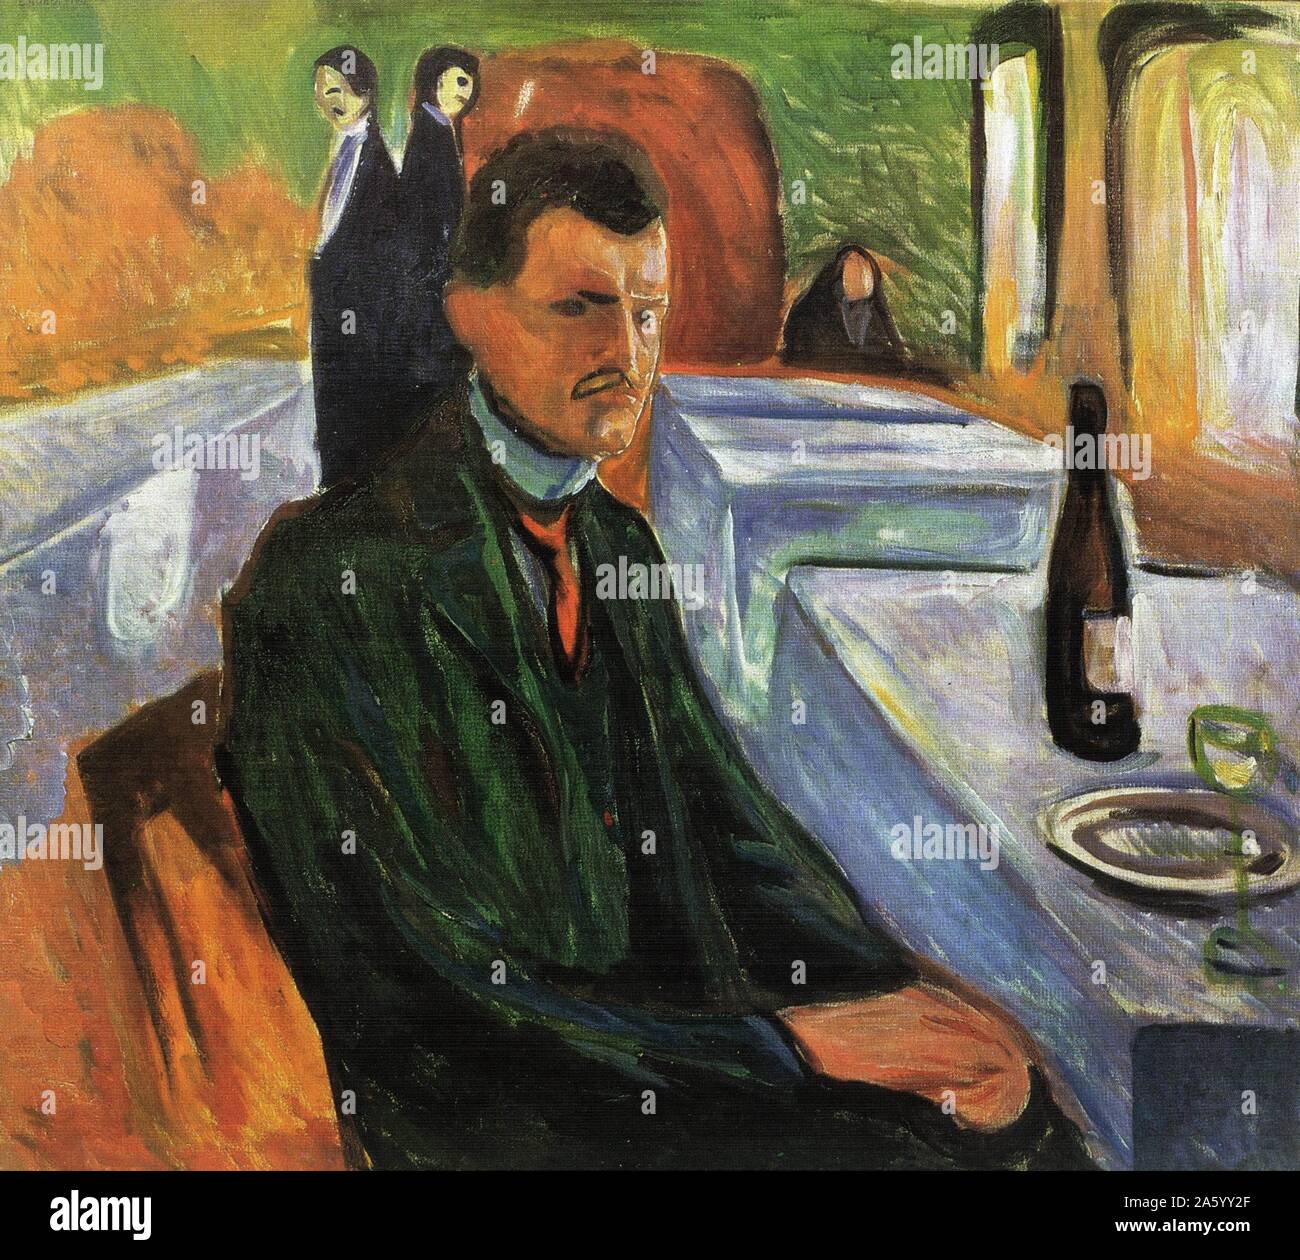 Painting titled 'Self Portrait in a Wine Bottle' by Edvard Munch (1863-1944) Norwegian painter and printmaker whose intensely evocative treatment of psychological themes built upon some of the main tenets of late 19th-century Symbolism and greatly influenced German Expressionism in the early 20th century. One of his most well-known works is The Scream of 1893. Dated 1906 Stock Photo